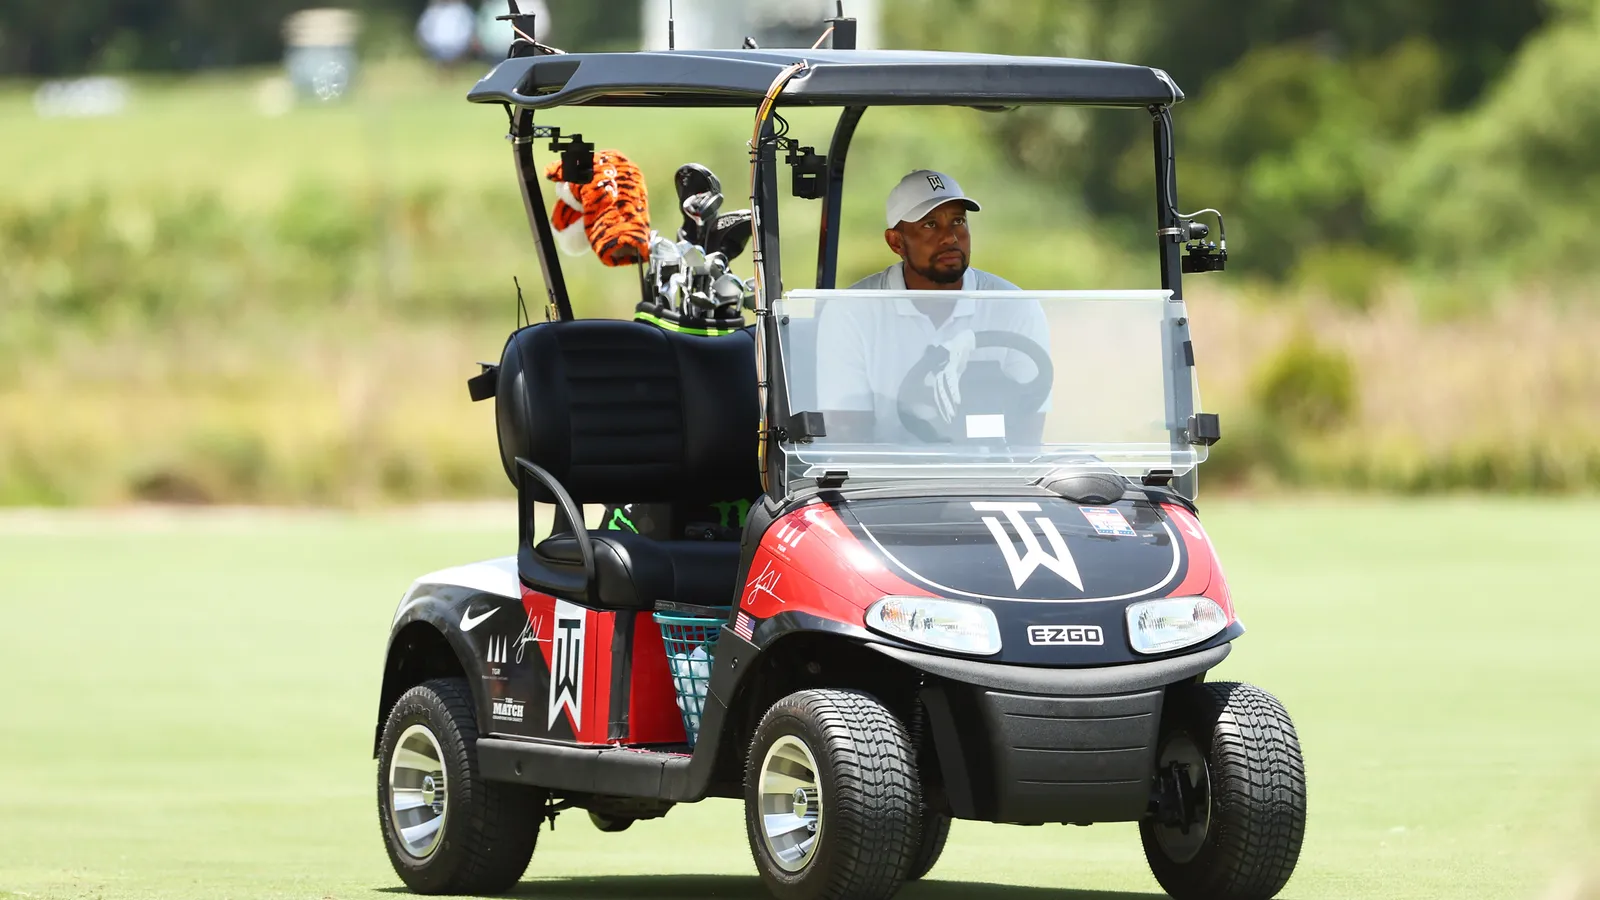 Tiger Woods Will ‘Love’ To Play In The Seniors – And He’ll Use A Cart